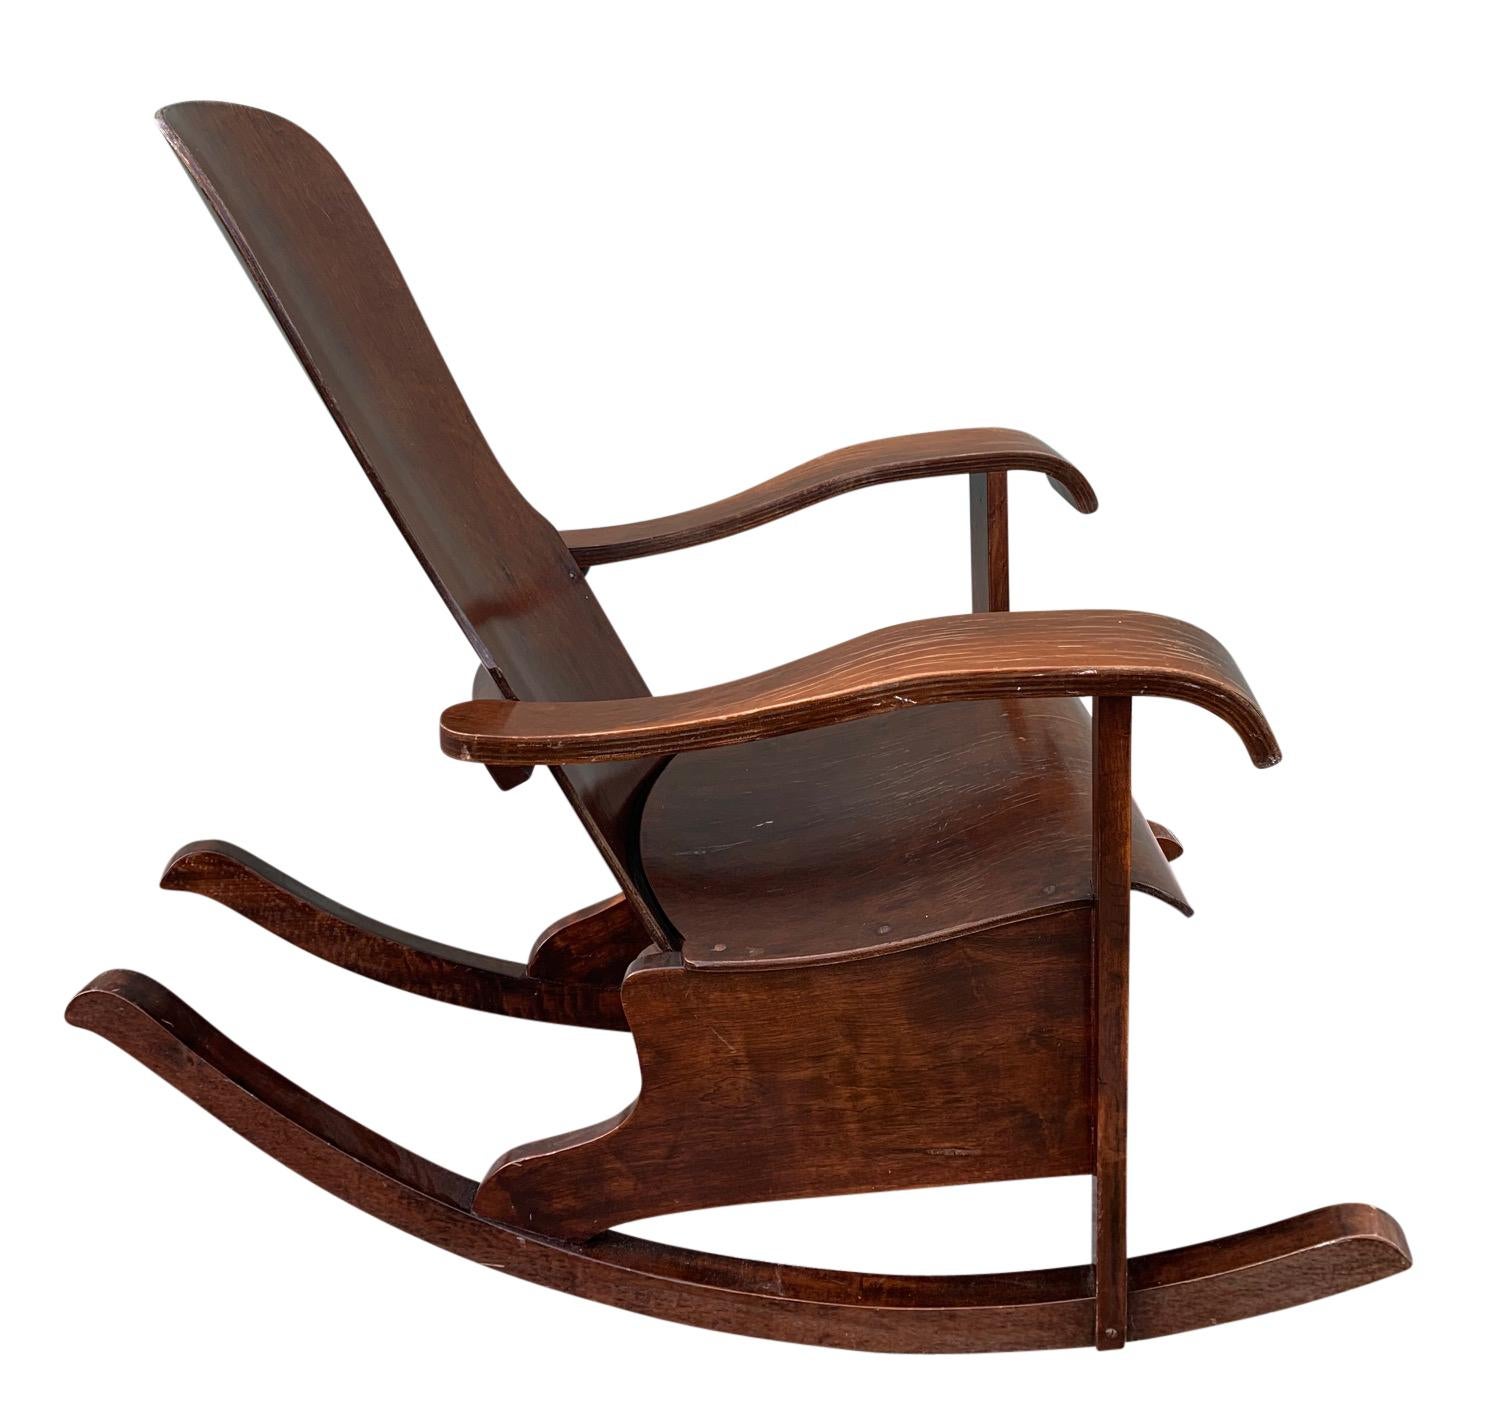 Bentwood Rocking chair by Moveis Cimo.